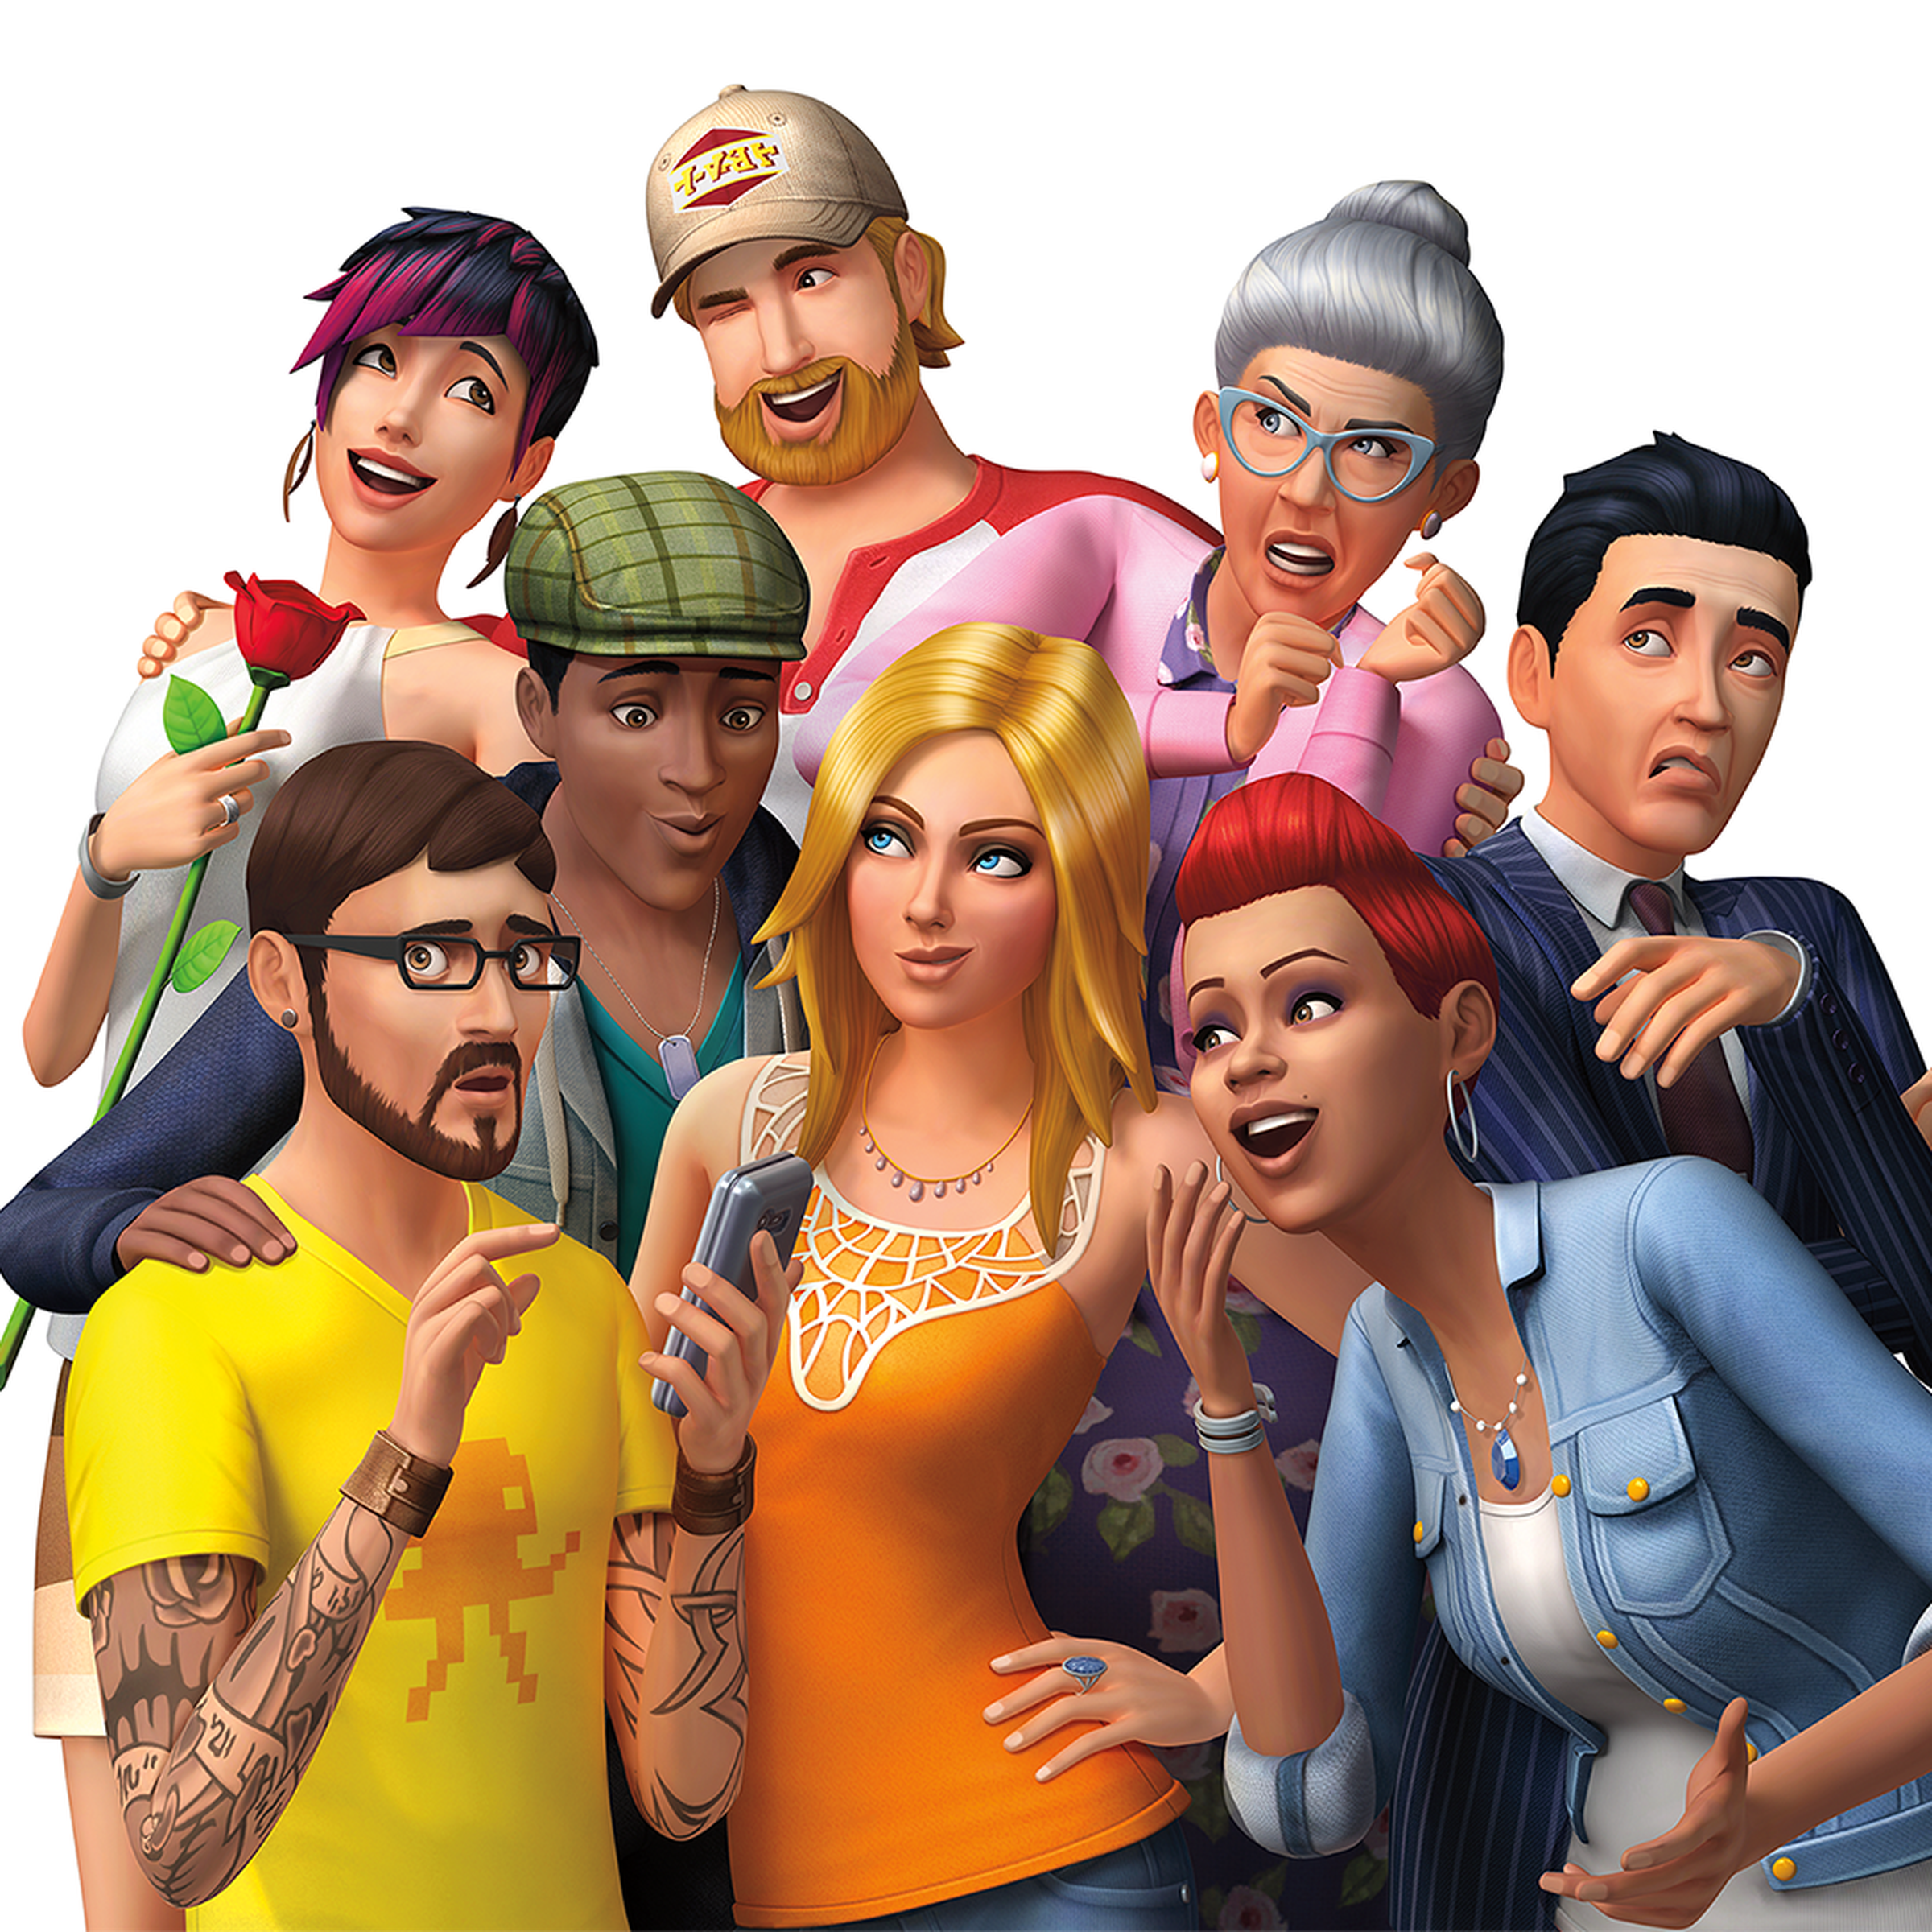 Key art from The Sims 4 featuring a collection of Sims of different ages, races, and genders.